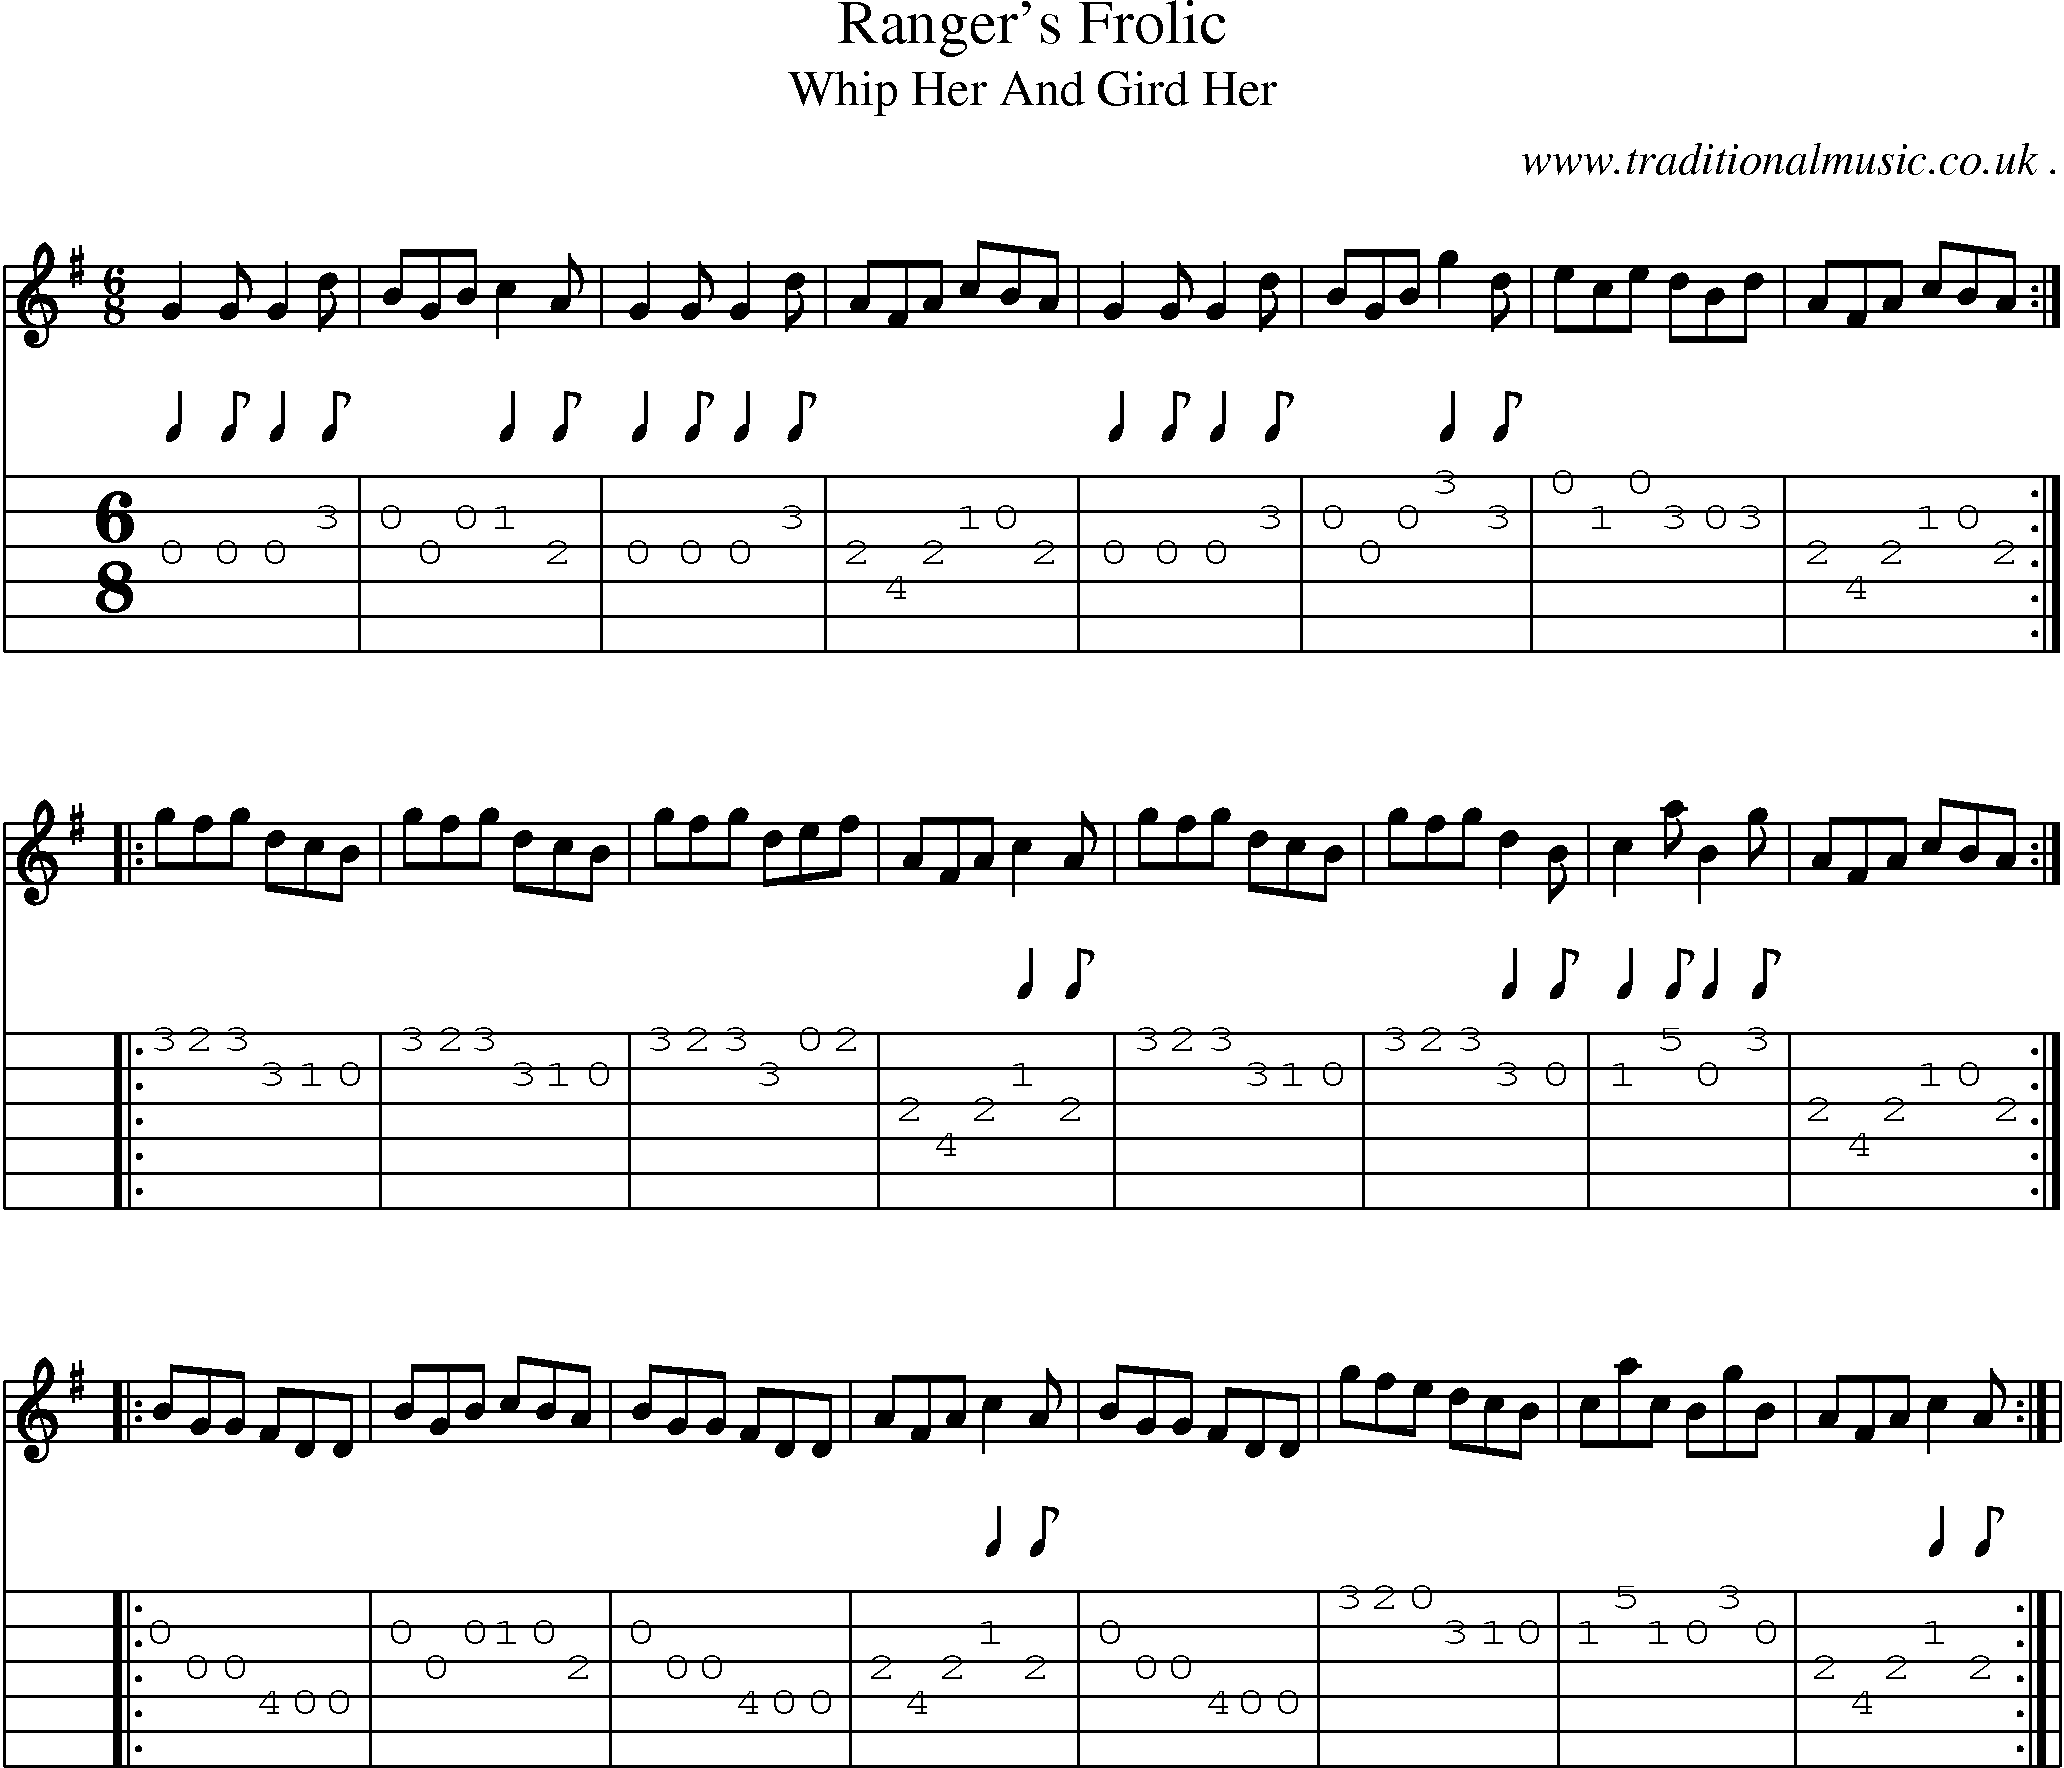 Sheet-Music and Guitar Tabs for Rangers Frolic